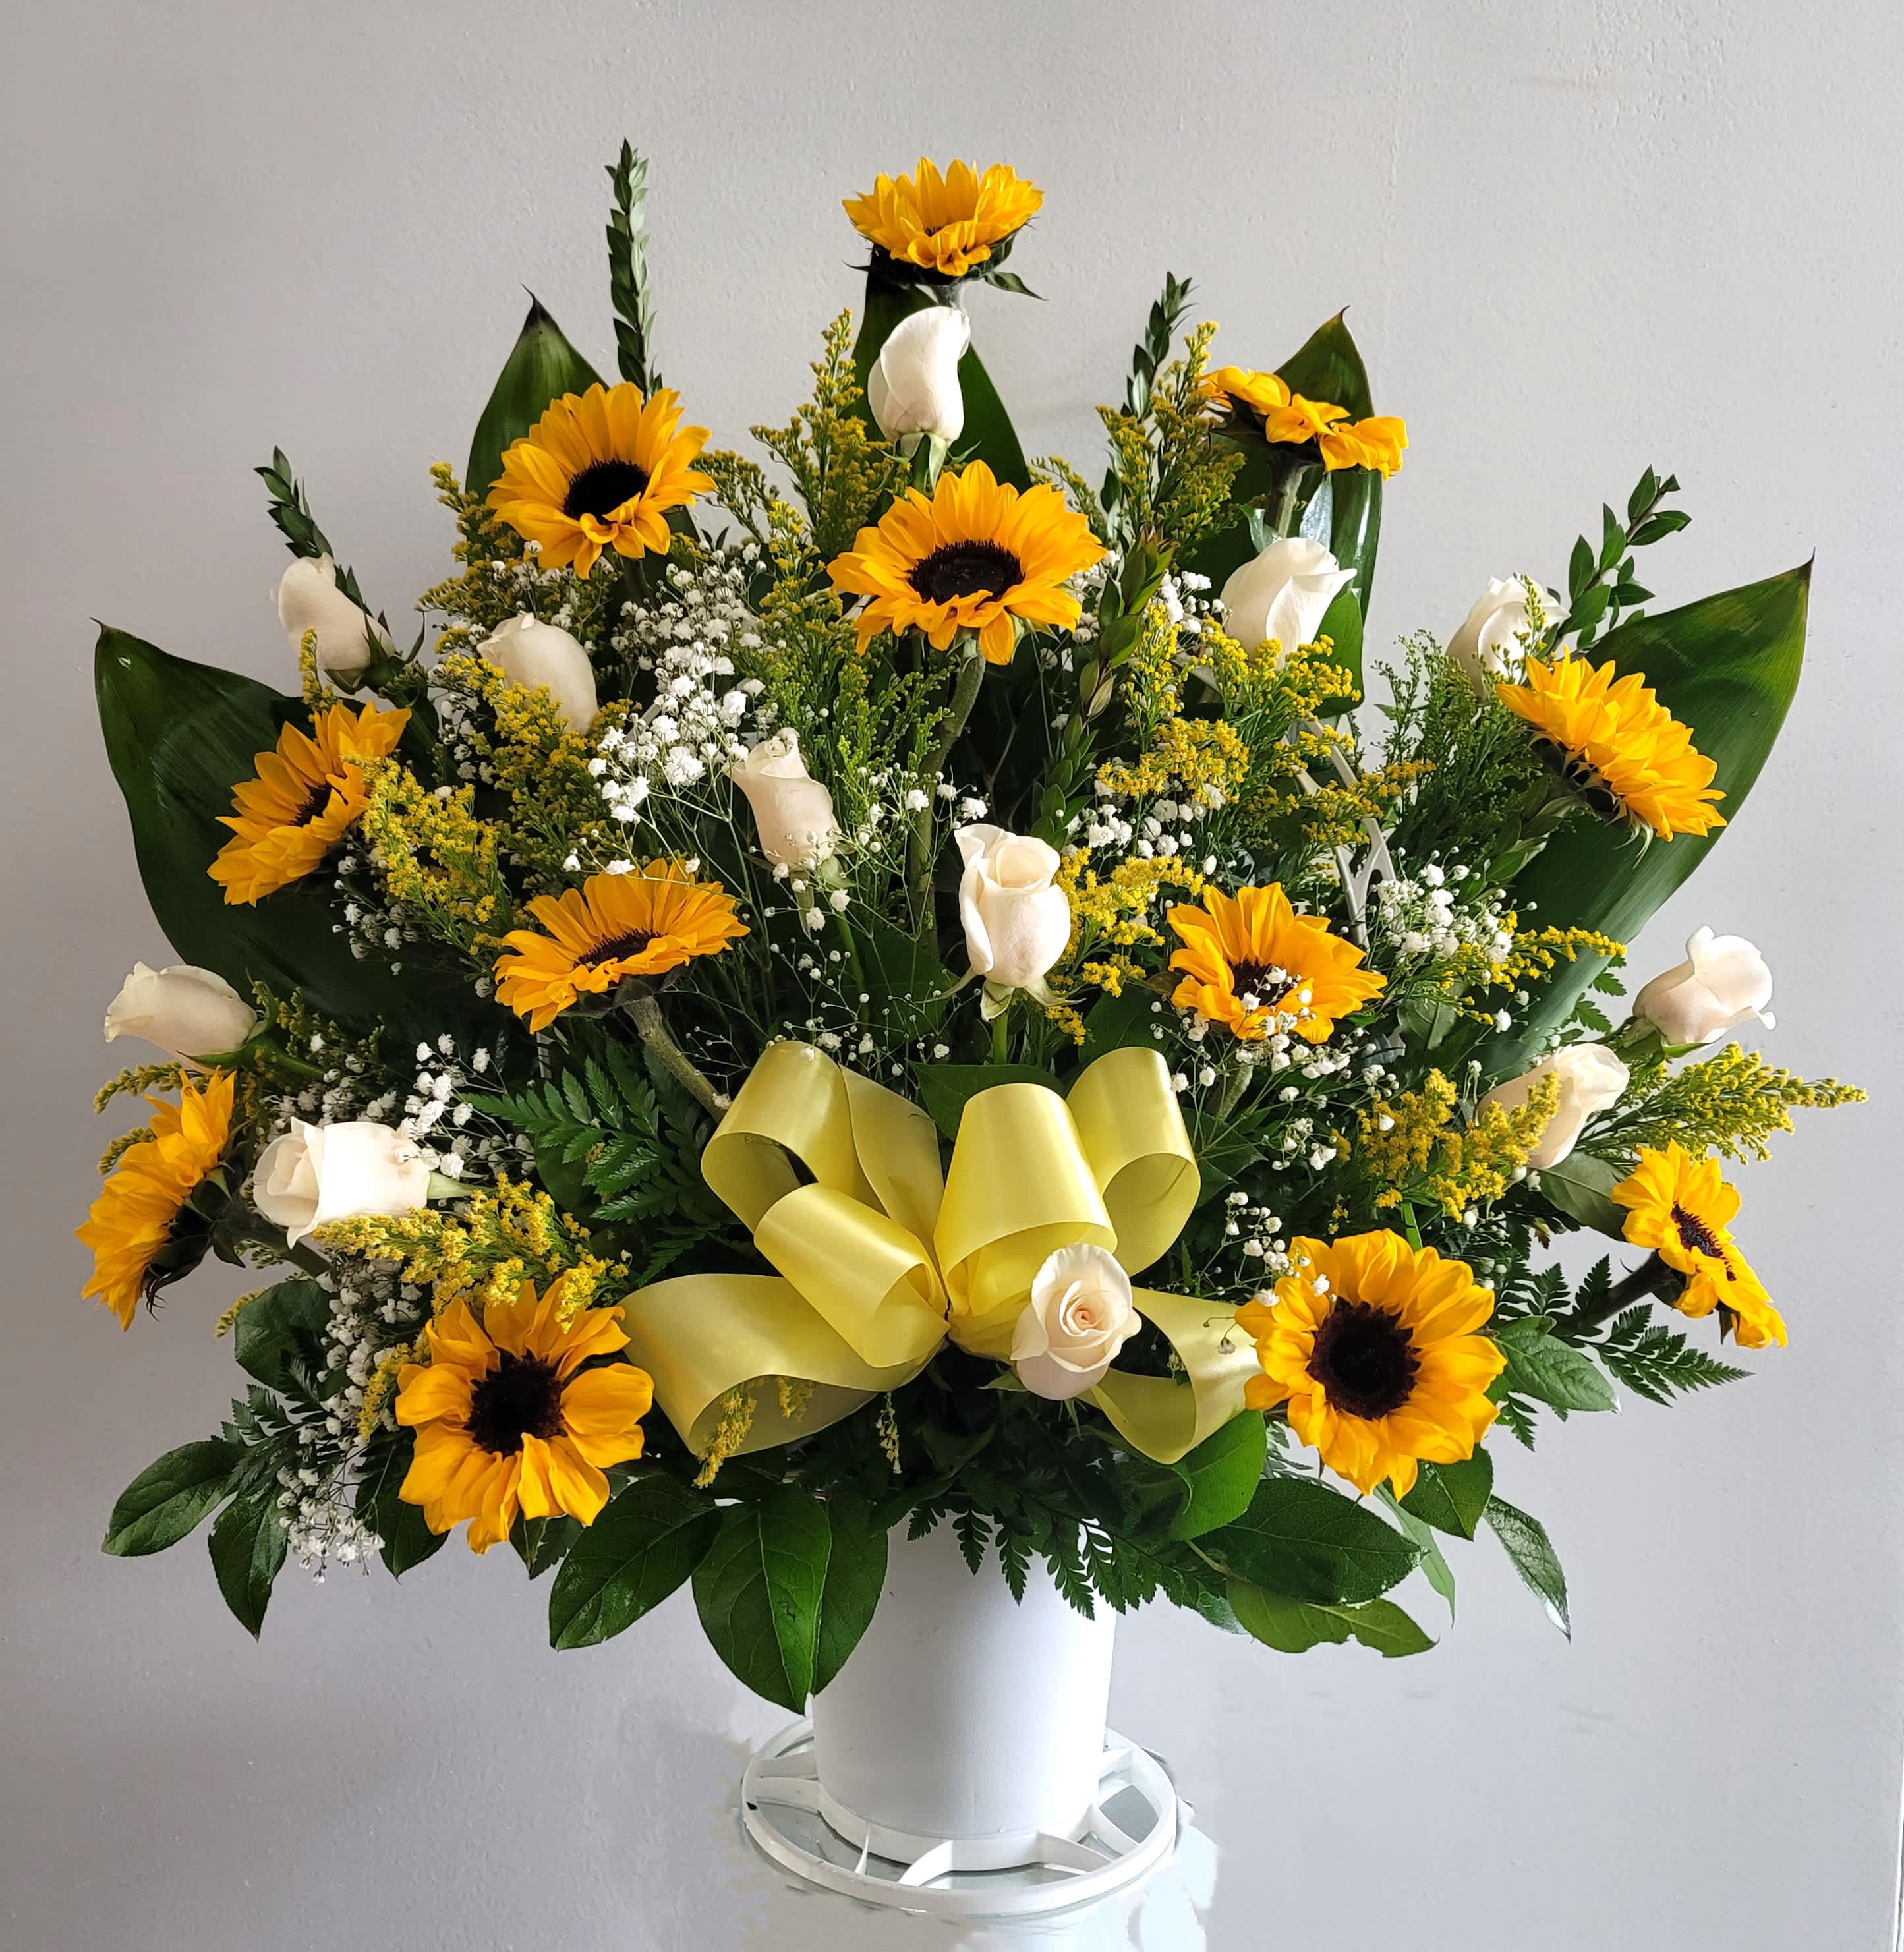 SYMPATHY BASKET WITH SUNFLOWERS &amp; WHITE ROSES - BASKET FOR SYMPATHY. DESIGNED WITH SUNFLOWERS AND WHITE ROSES